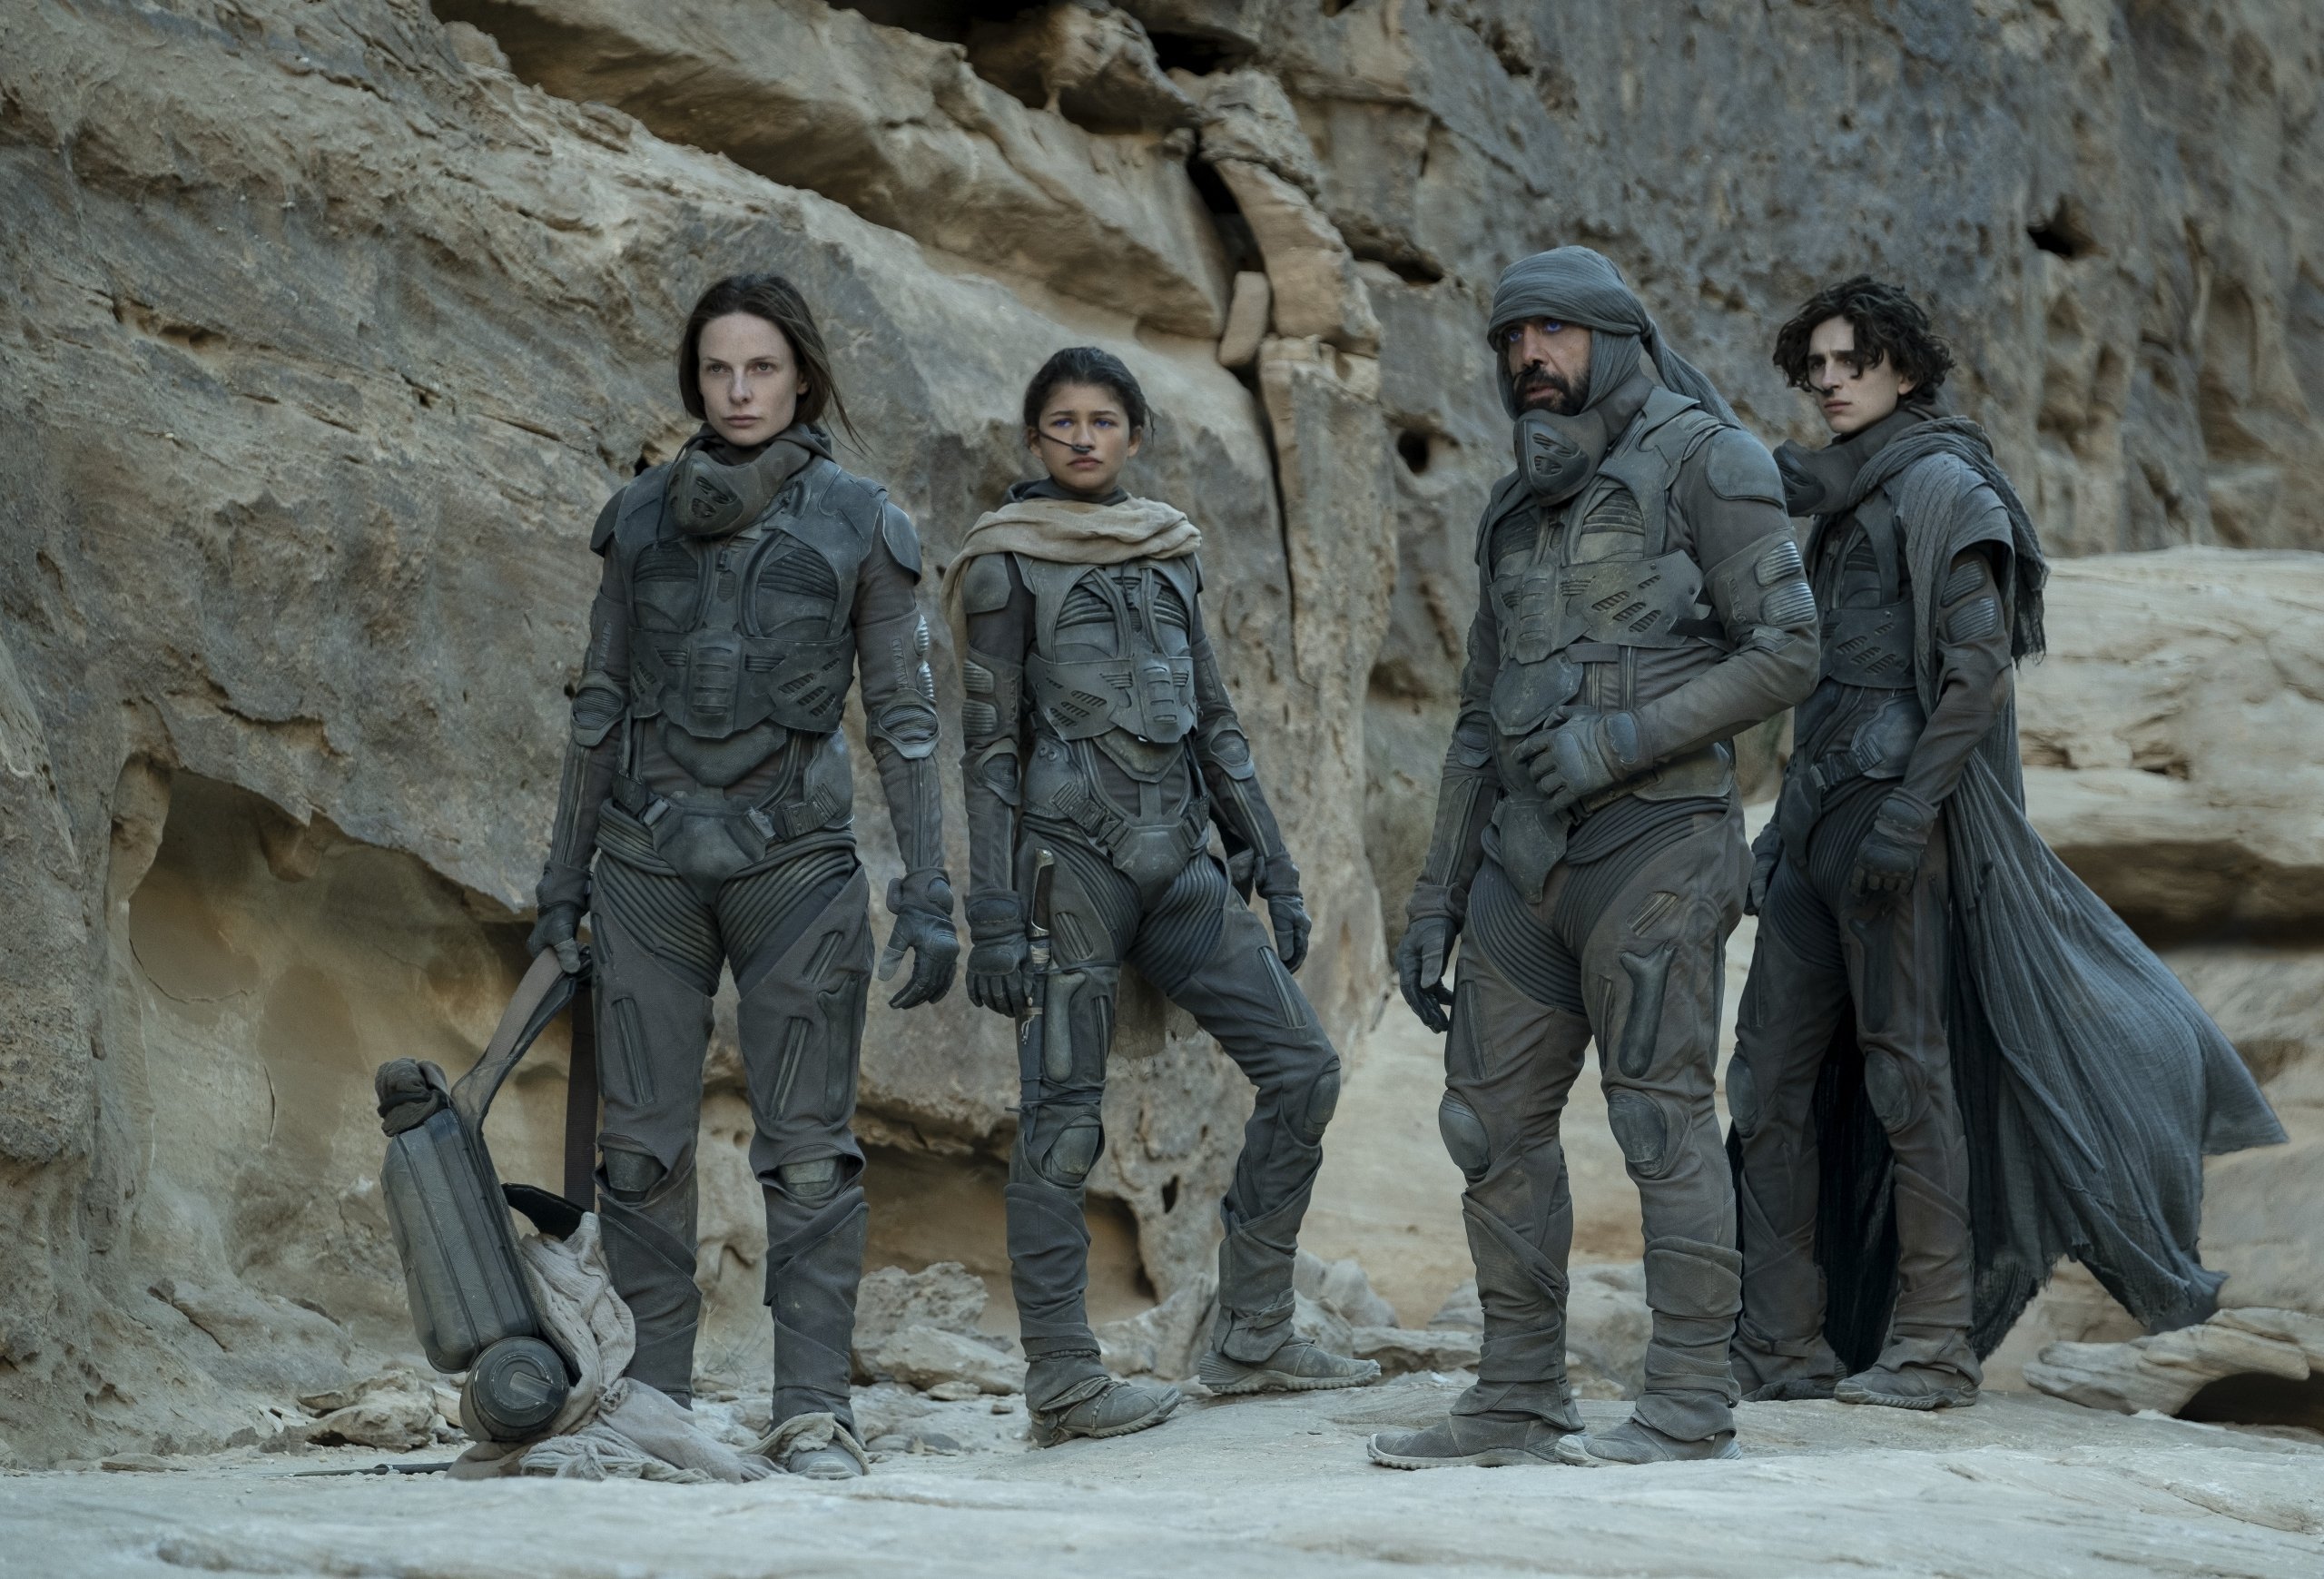 From left to right, Rebecca Furguson as Lady Jessica Atreides, Zendaya as Chani, Javier Bardem as Stilgar and Timothee Chalamet as Paul Atreides in a scene of the film 'Dune.' (DPA Photo)